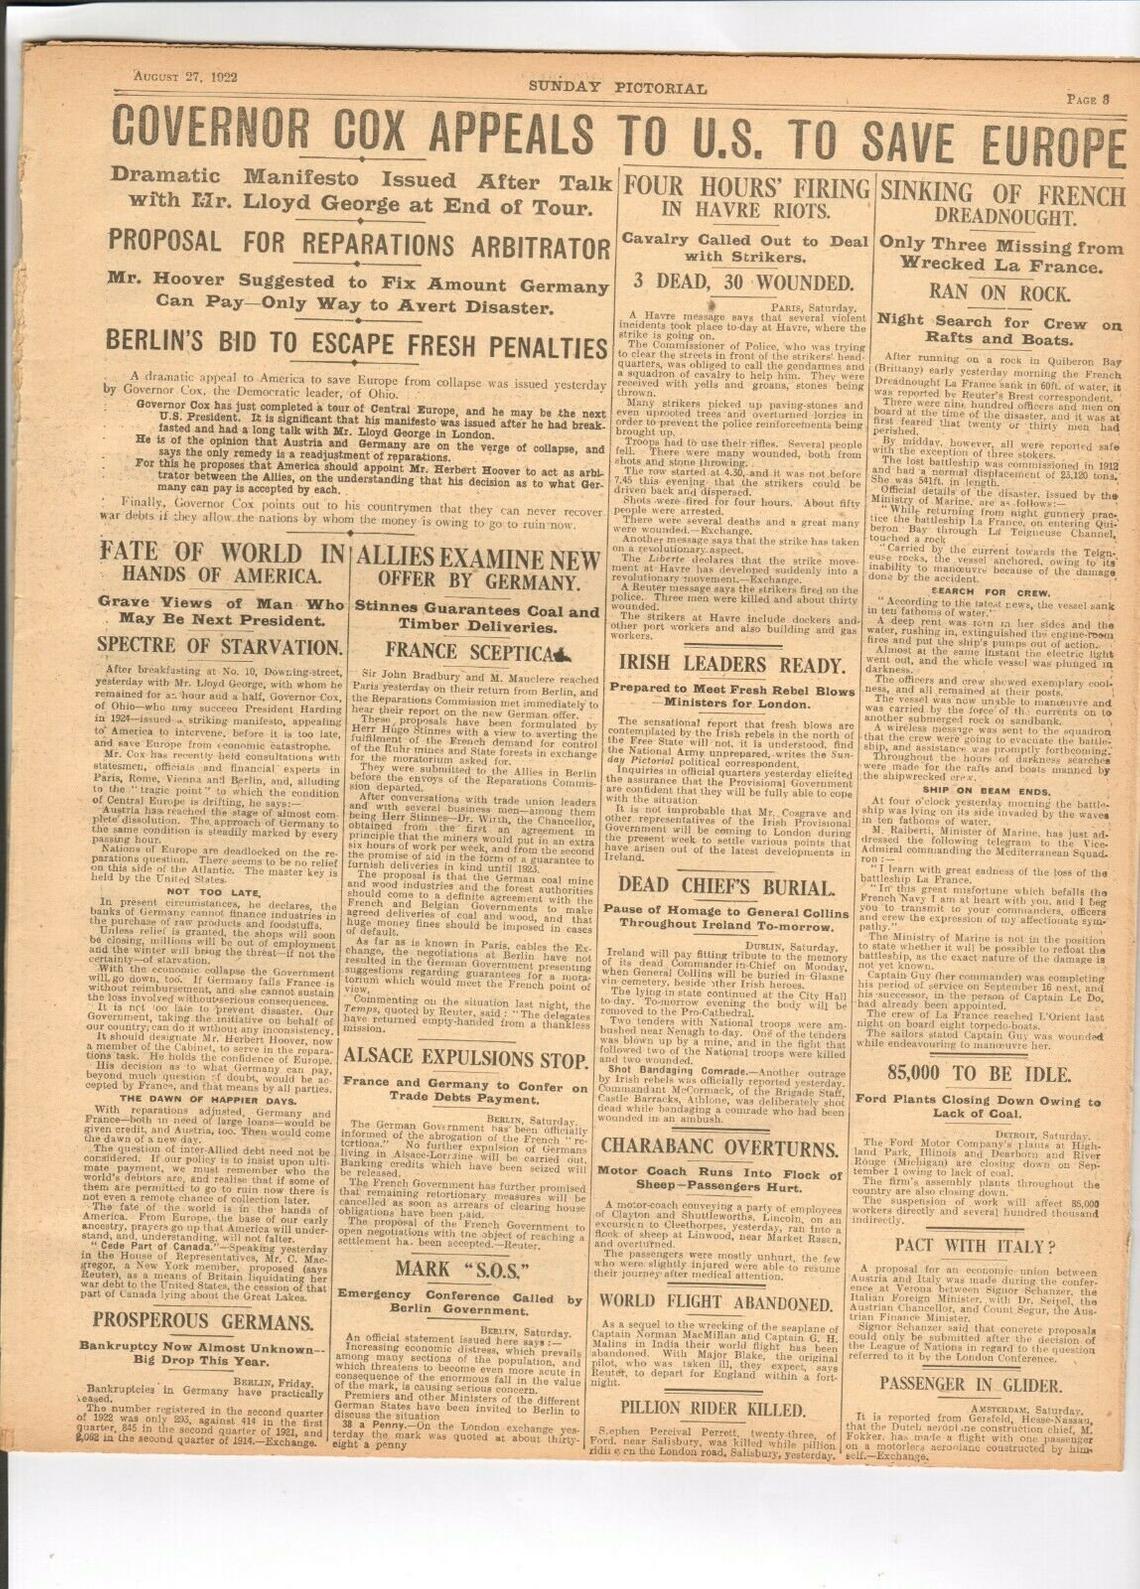 Original Sunday Pictorial Newspaper Aug 27 1922 The Funeral Of Michael Collins - Image 2 of 3